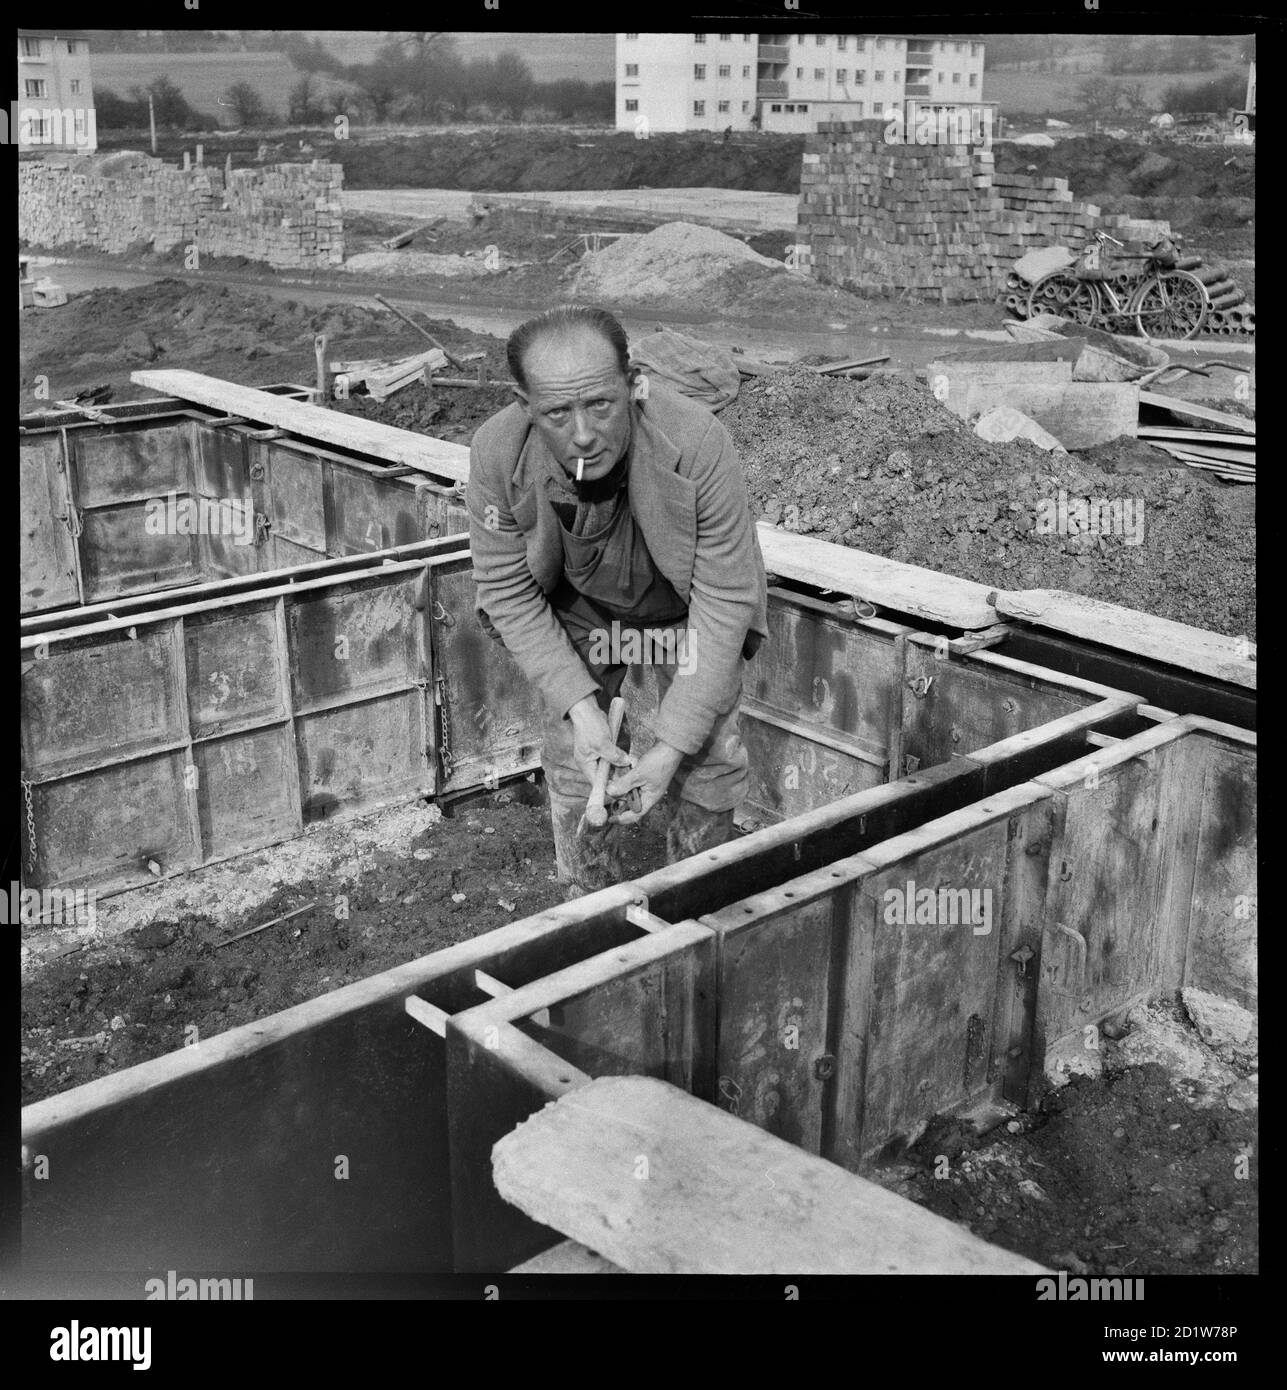 A man working in the concrete footings of houses on the Penhill Estate, Penhill, Swindon, Wiltshire, UK. Stock Photo